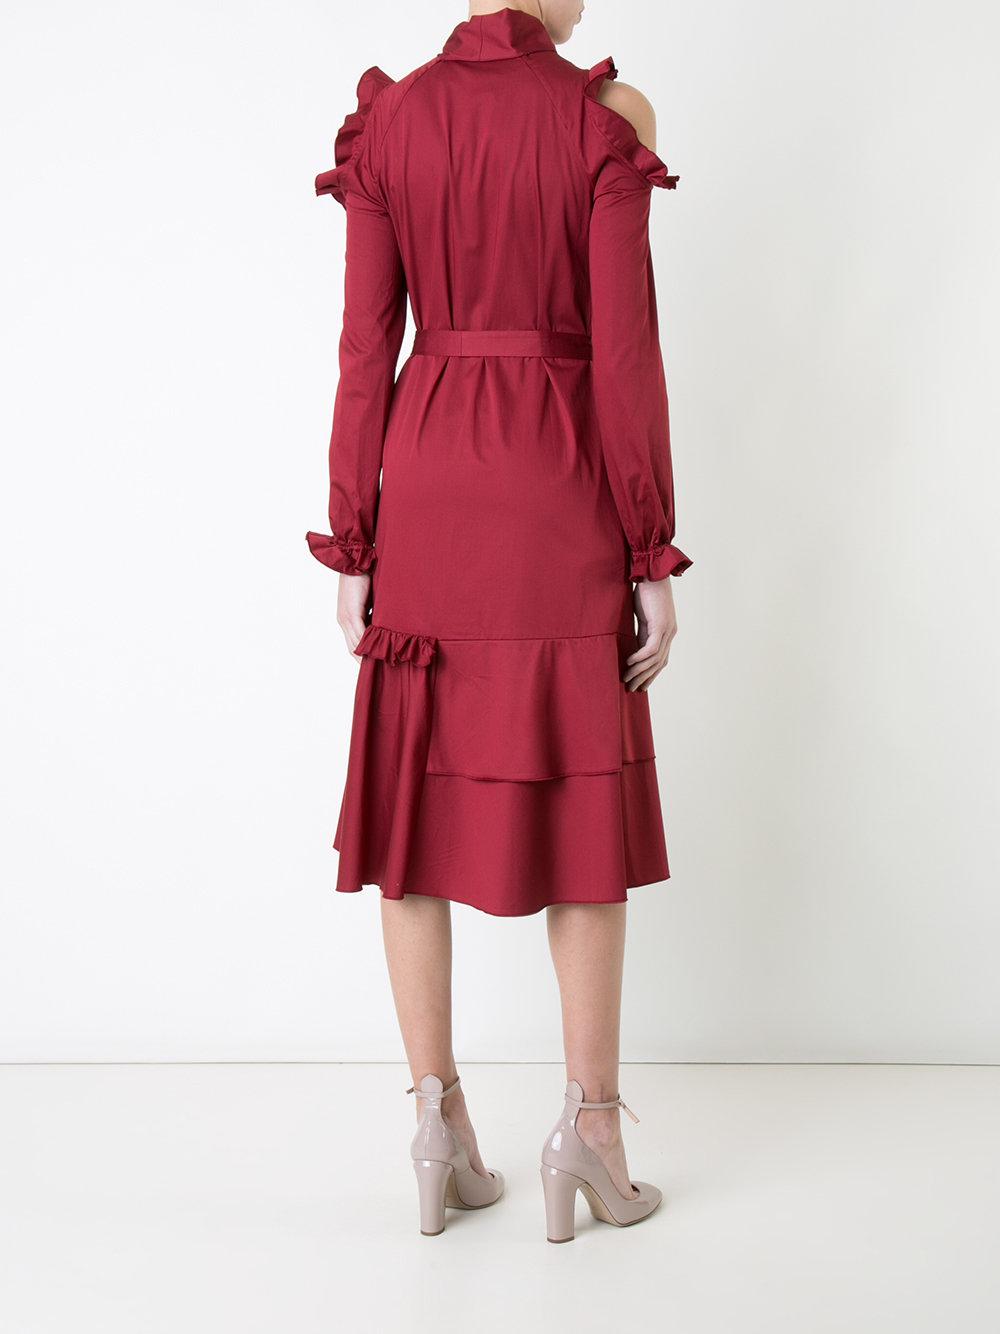 Lyst - Anna October Cut-out Shoulders Flared Dress in Red